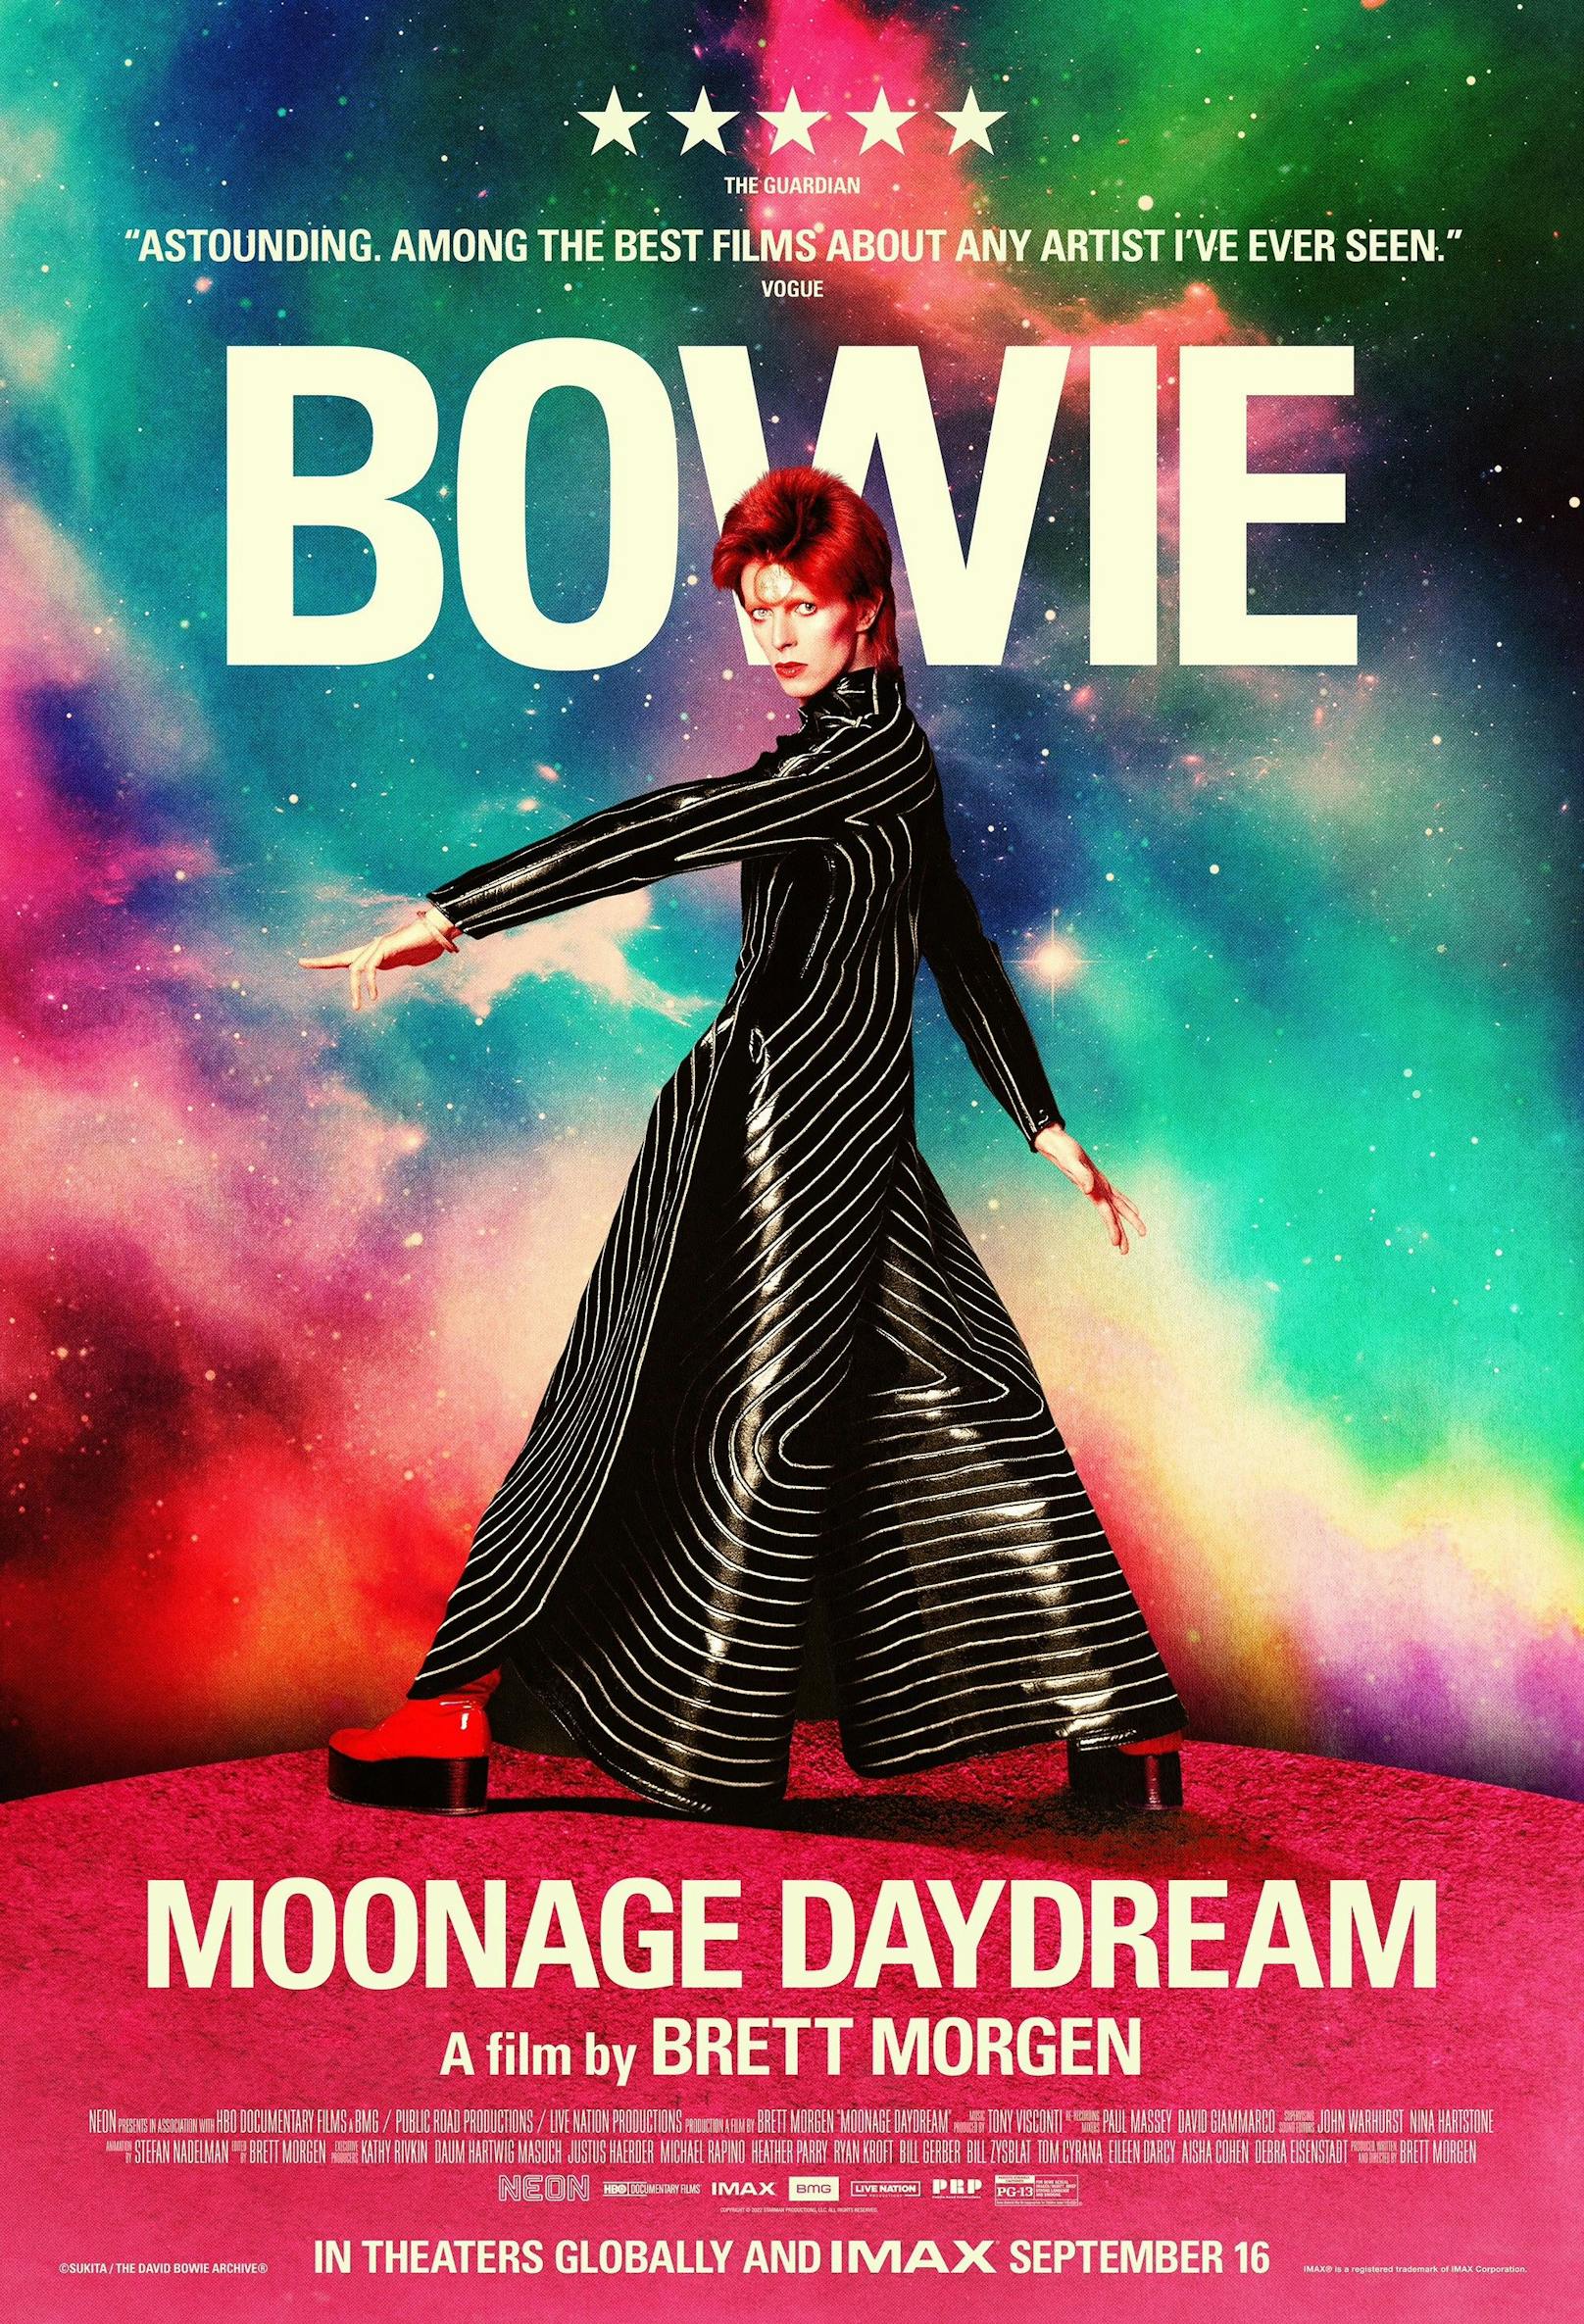 MOONAGE DAYDREAM, US-Poster, David Bowie, 2022.